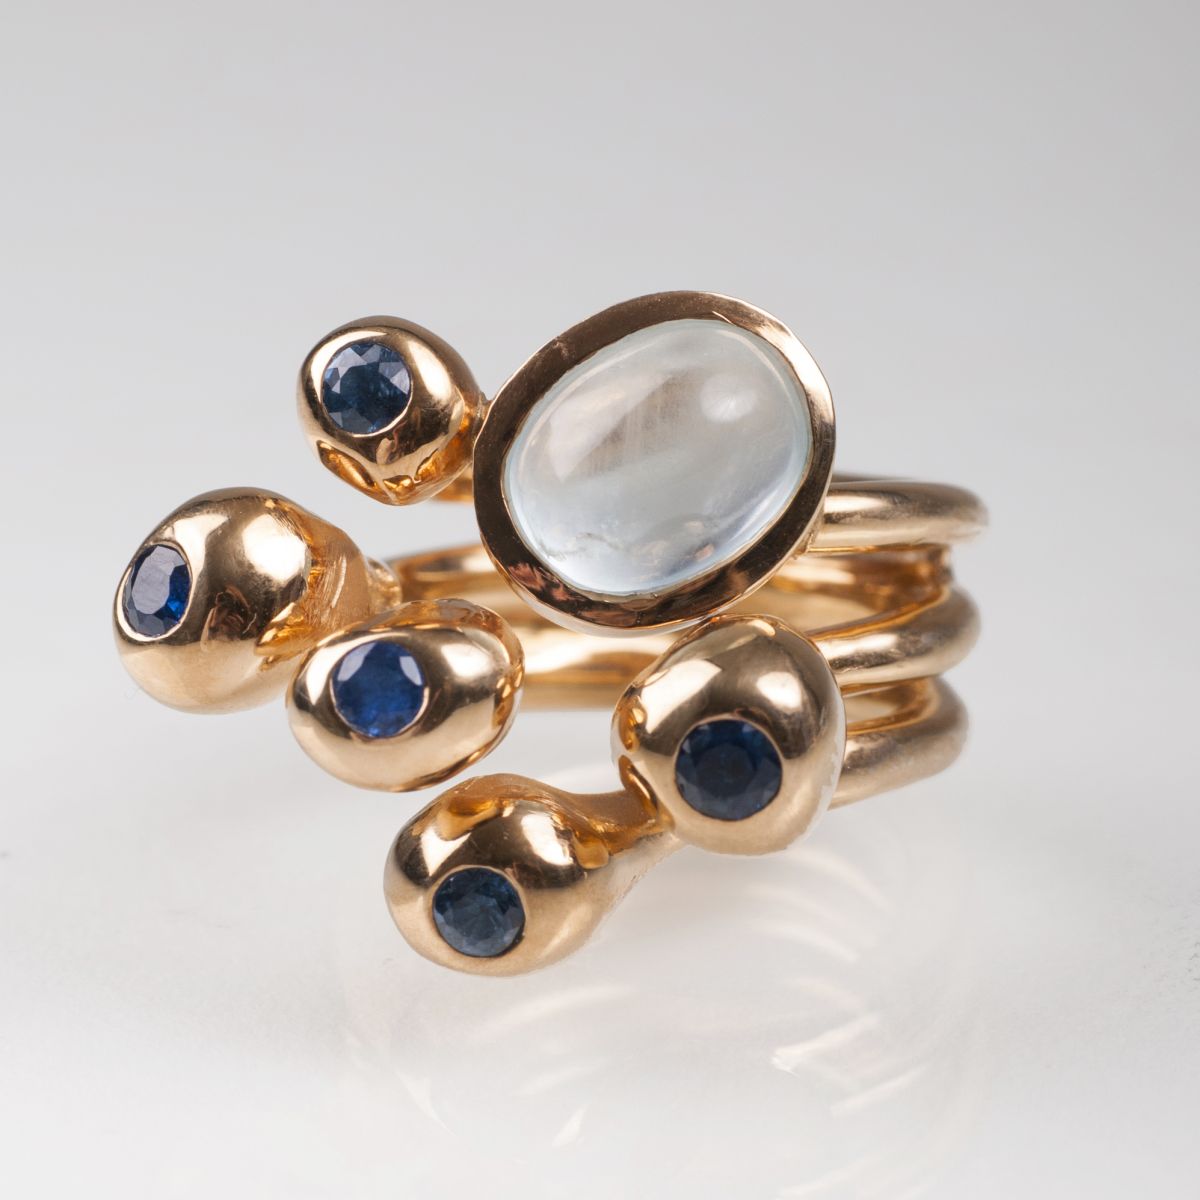 A modern ring with sapphire and aquamarin setting